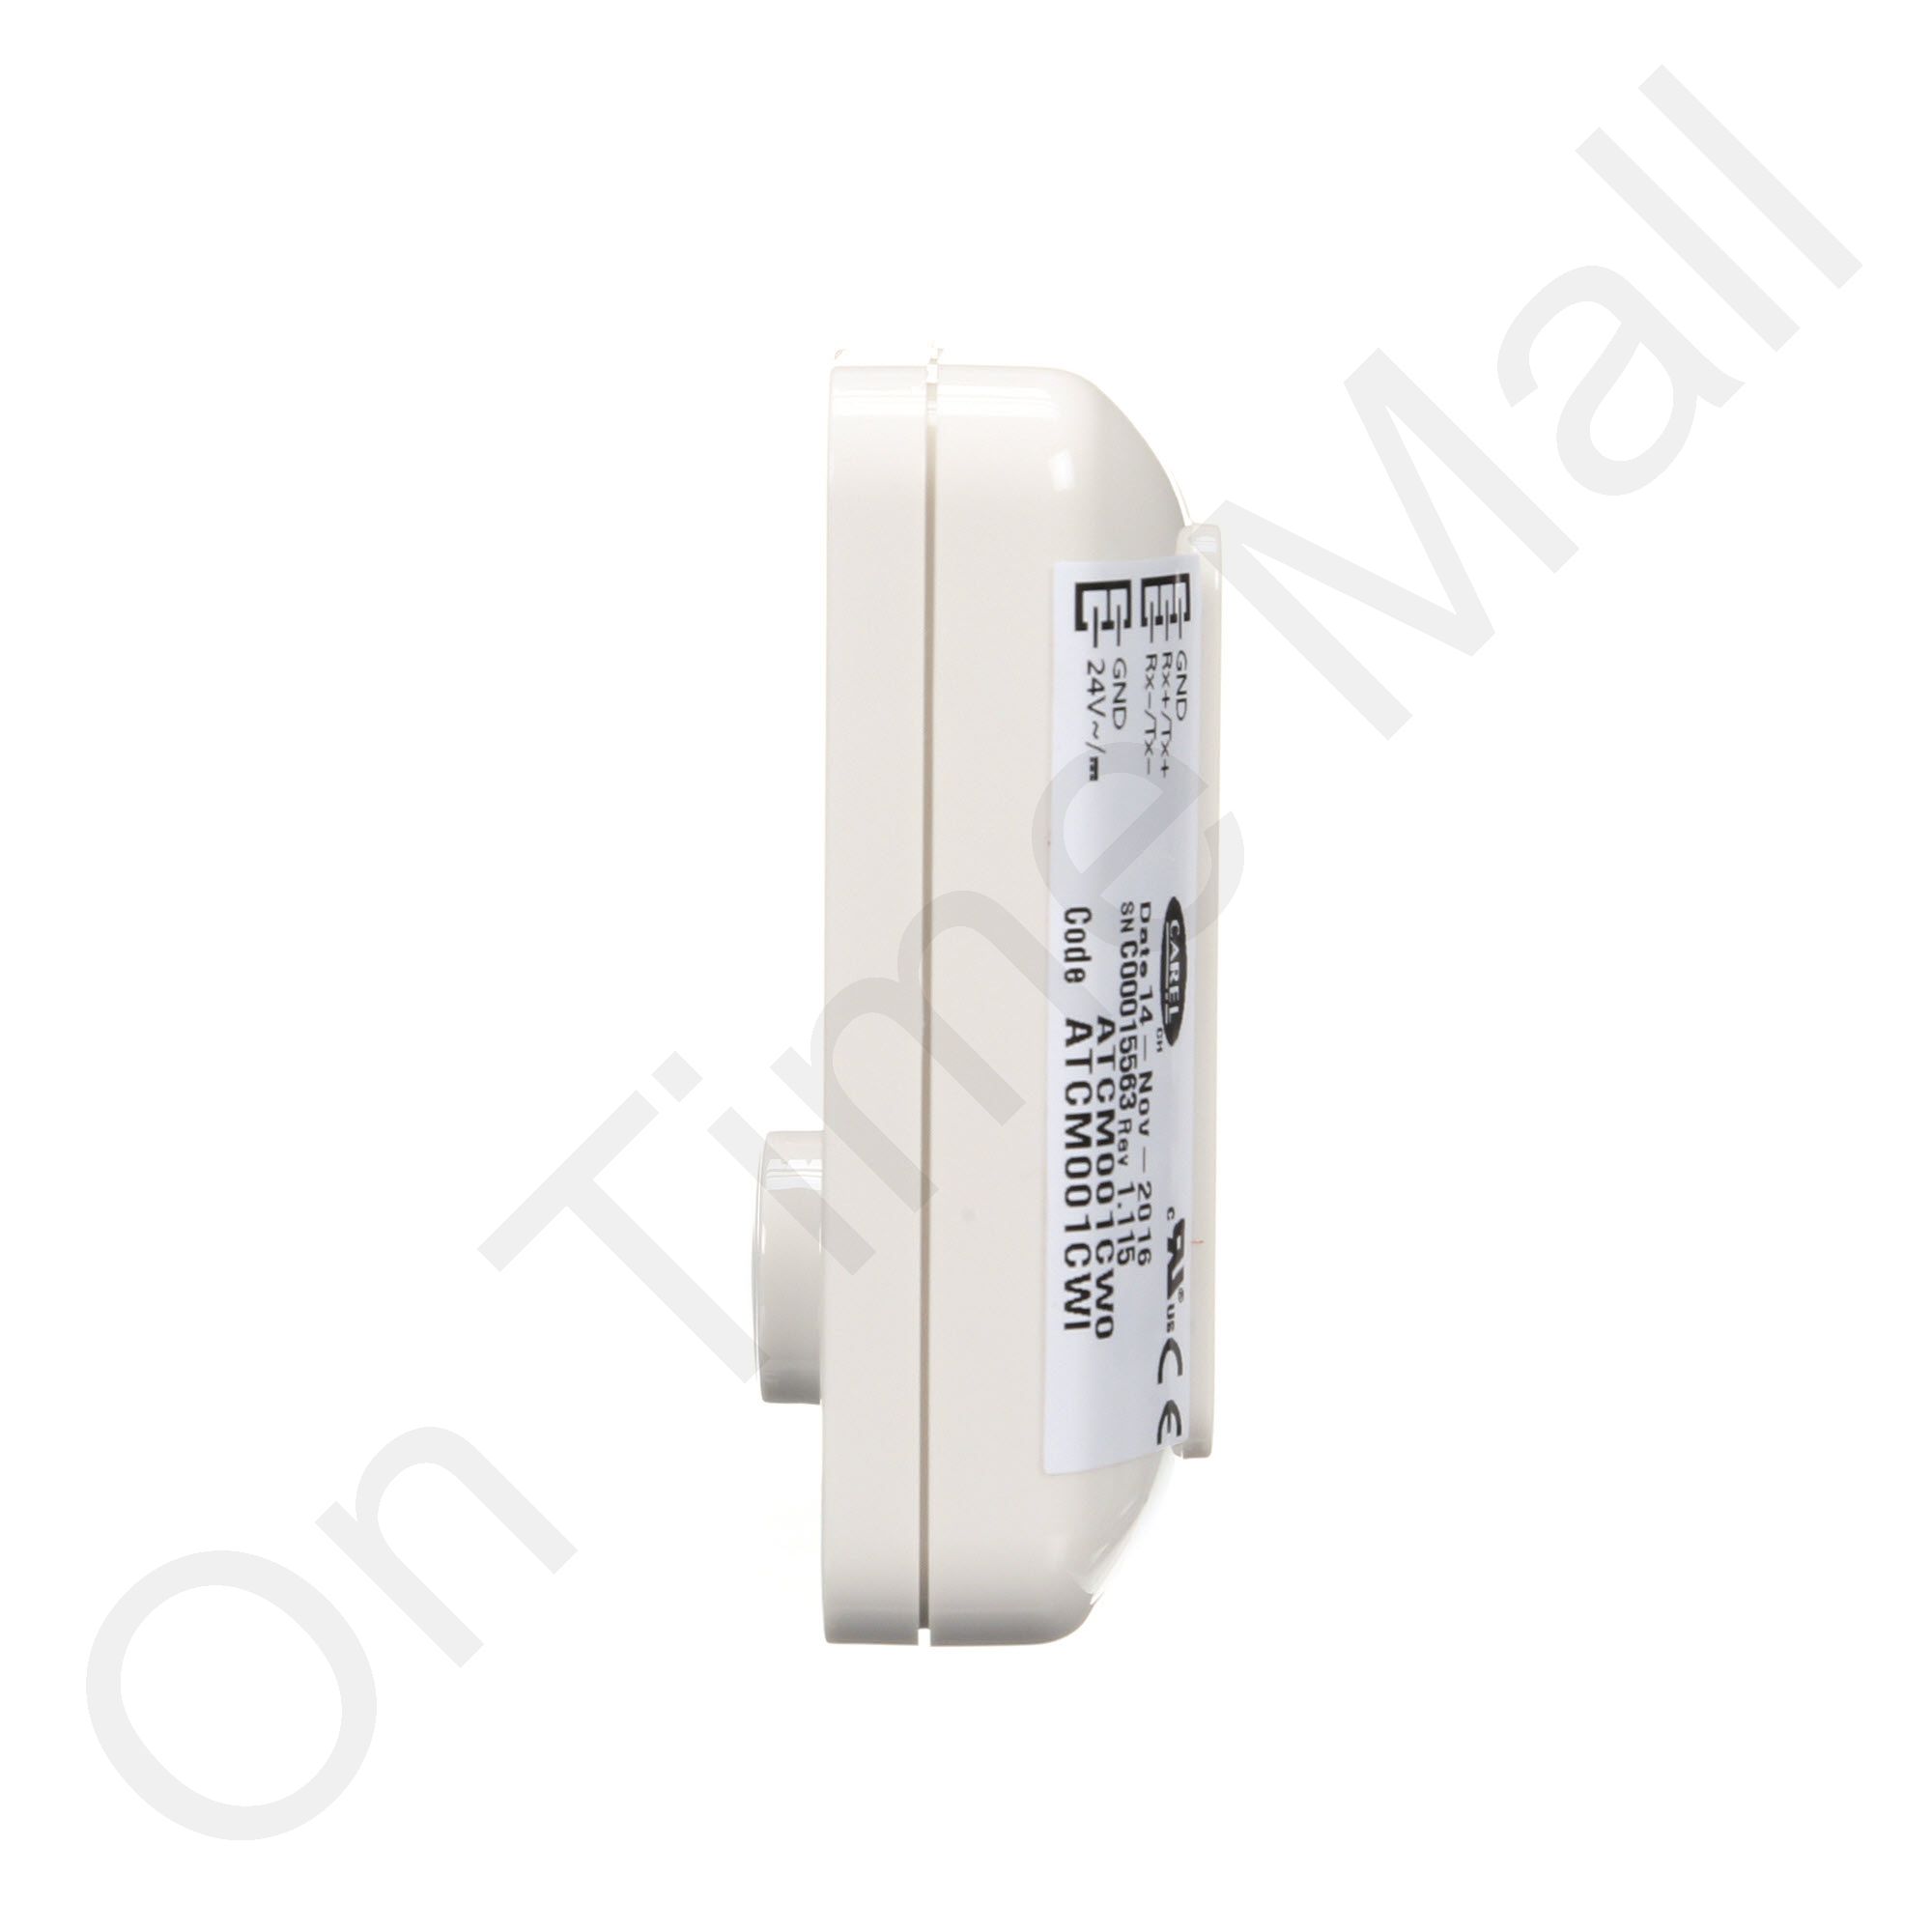 Chromalox Wall Mounted Residential and Commercial Room Thermostat WT-121  PCN 309999 - Thermal Devices - Thermal Devices